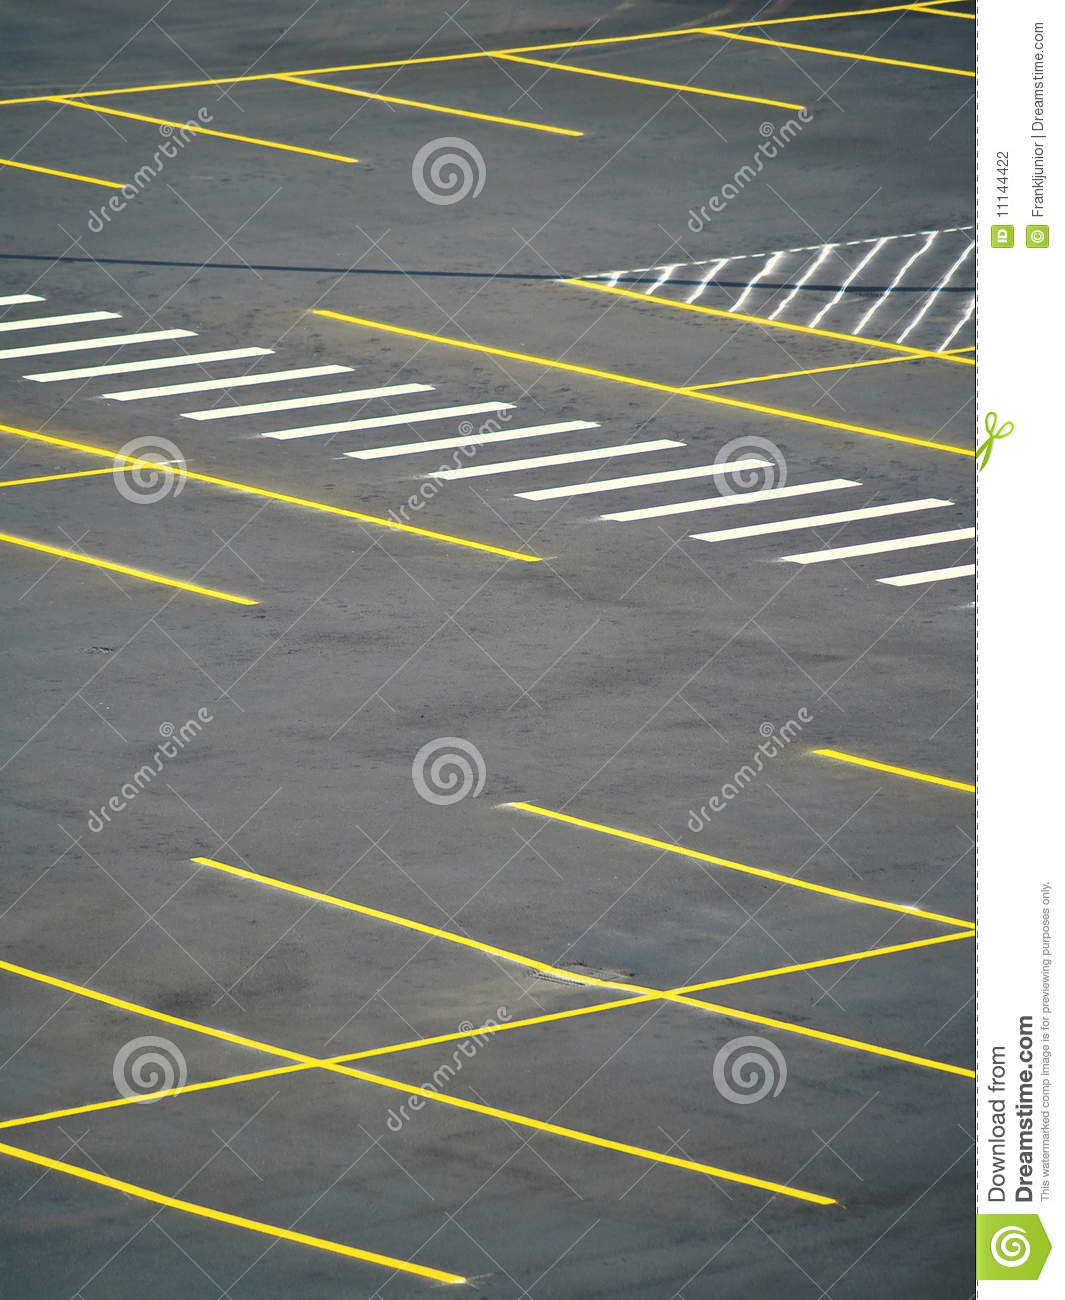 Empty Parking Lot Stock Photography   Image  11144422